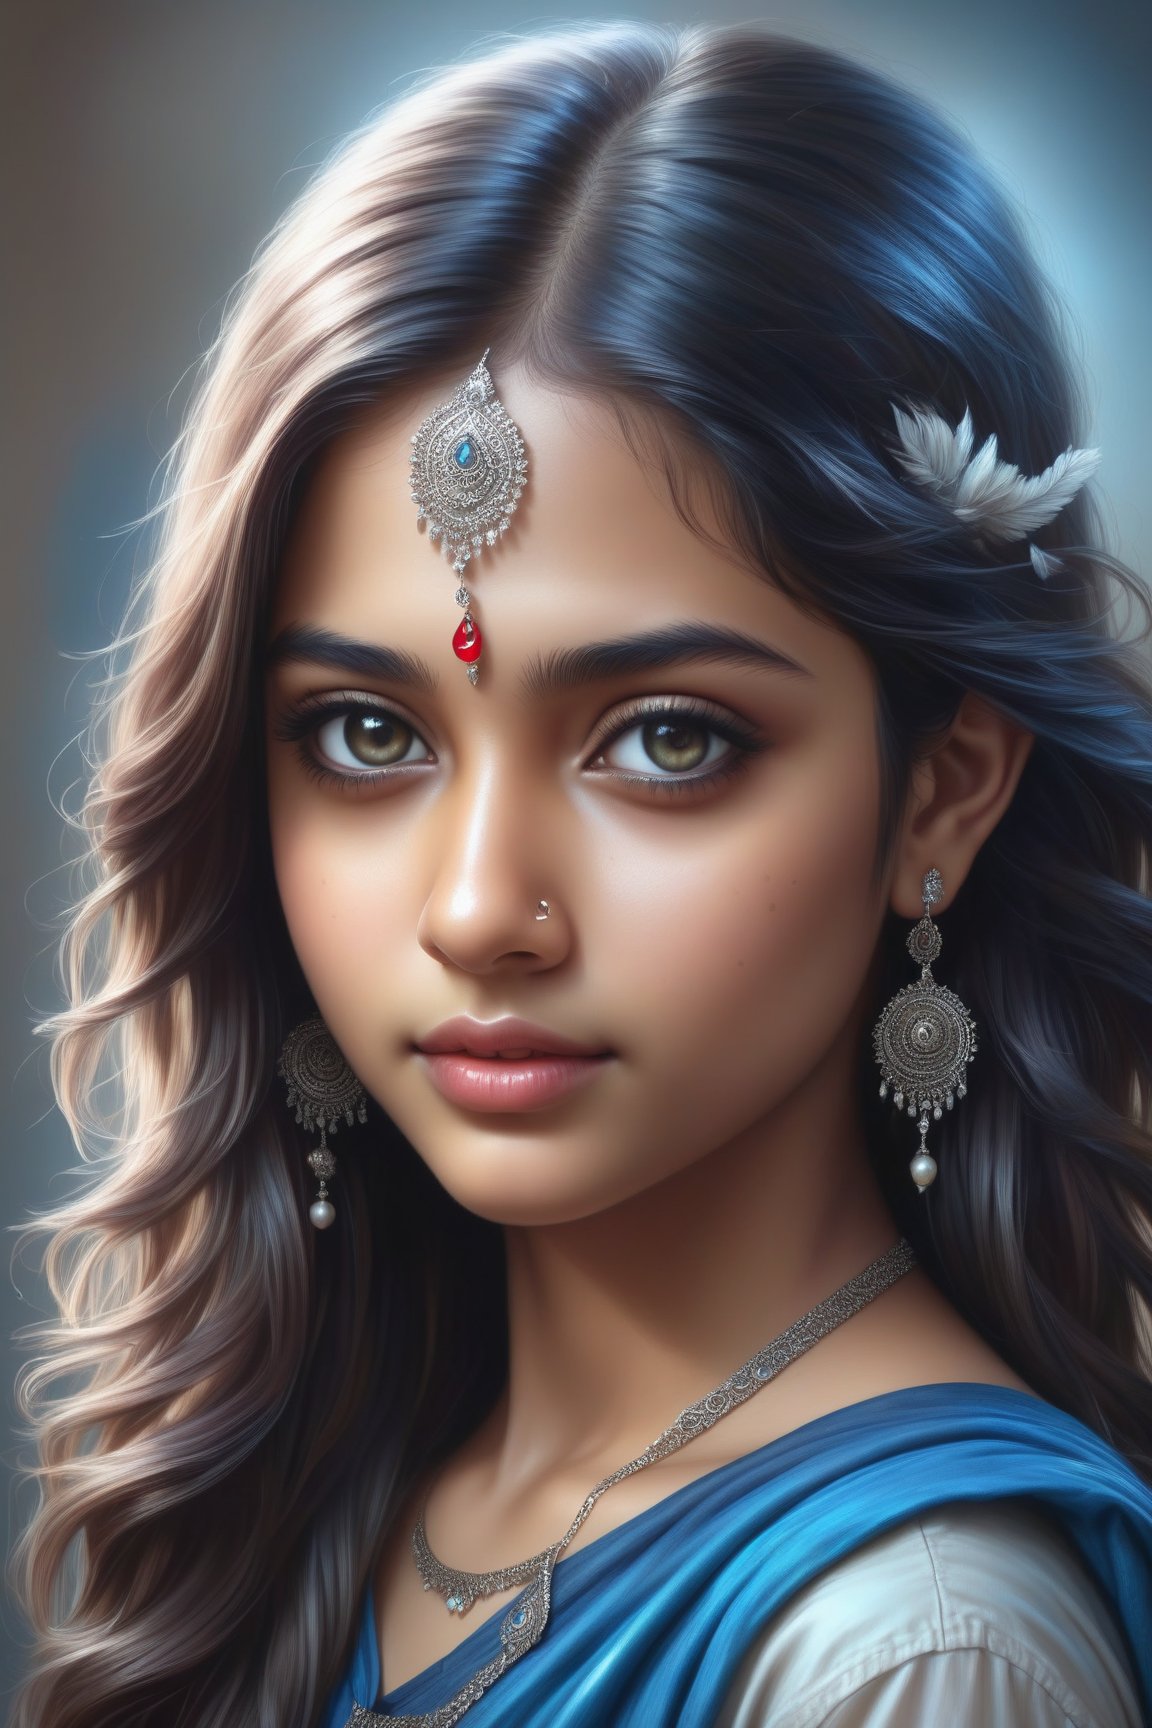 beautiful Indian girl, 23 year old, artist's sketch, realistic, pencil drawing, pencil sketch, digital_drawing, artwork, artwork_(digital), digital_art, digital_artworks, sketch, painting, ,zwuul,DonMM1y4XL,DonMSn0wM4g1cXL,DonMDr4g0nXL,Insta Model,more detail XL